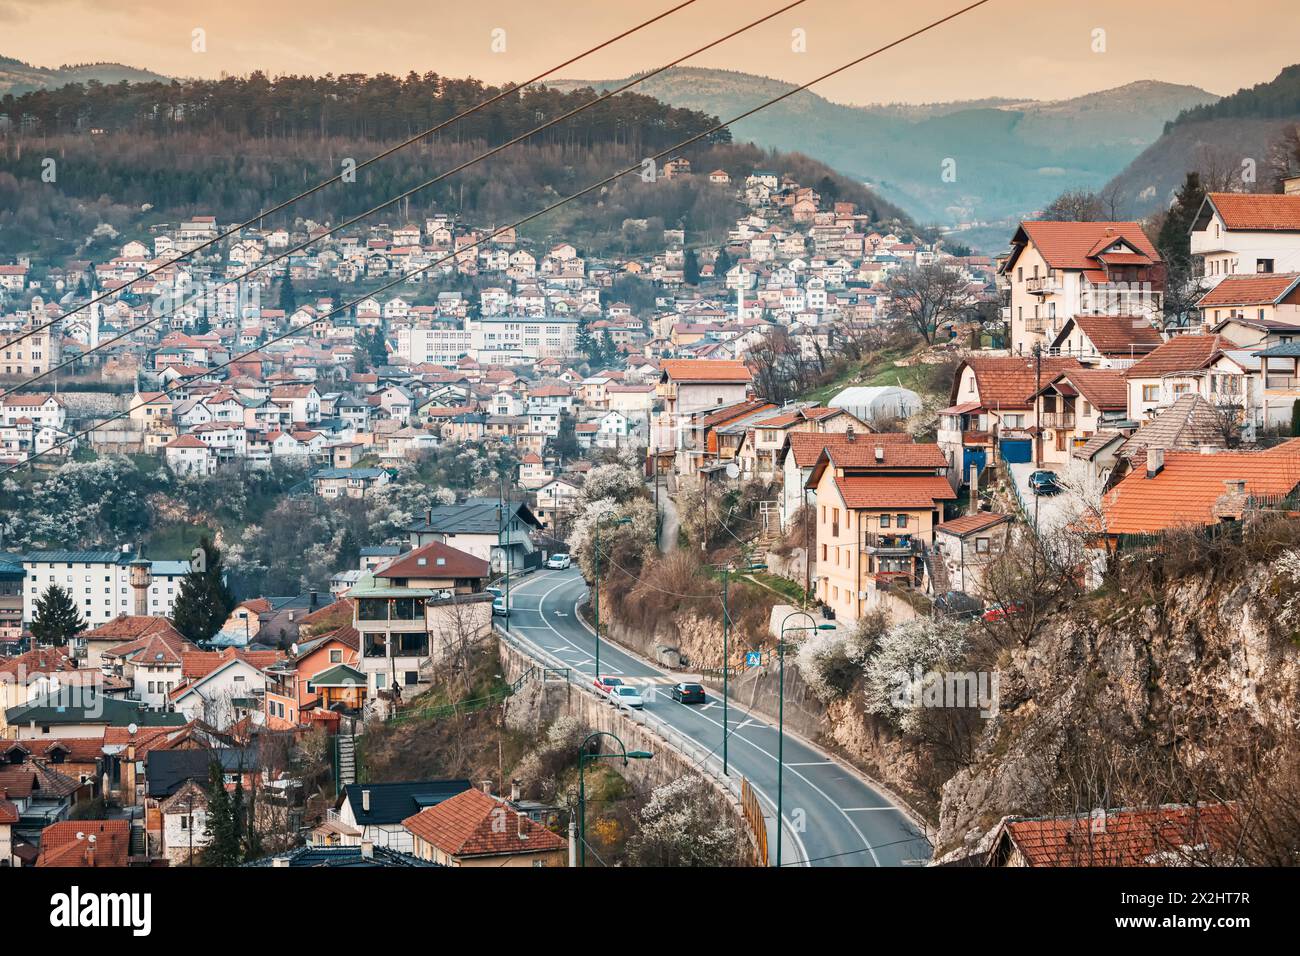 At sunset, Sarajevo's cityscape unfolds, with winding roads weaving through colorful neighborhoods against the backdrop of majestic mountains. Stock Photo